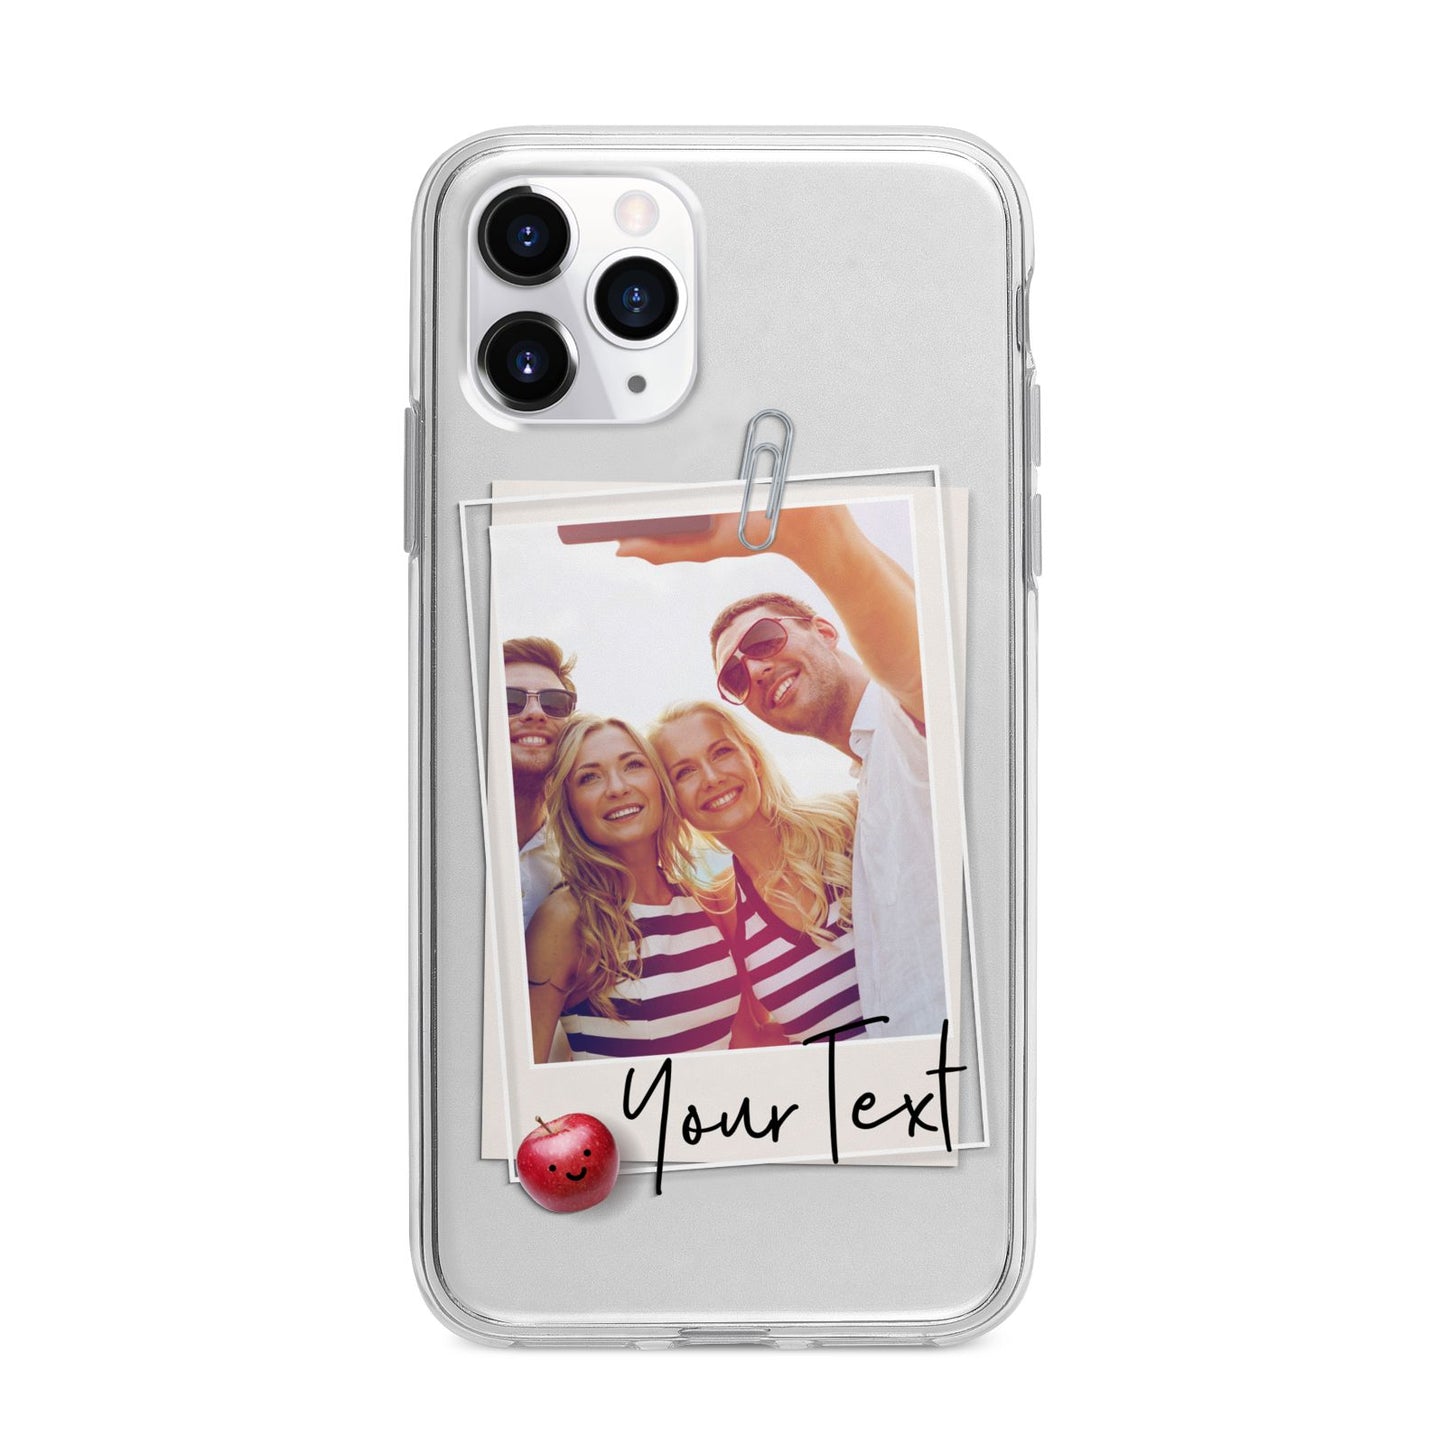 Photograph and Name Apple iPhone 11 Pro Max in Silver with Bumper Case